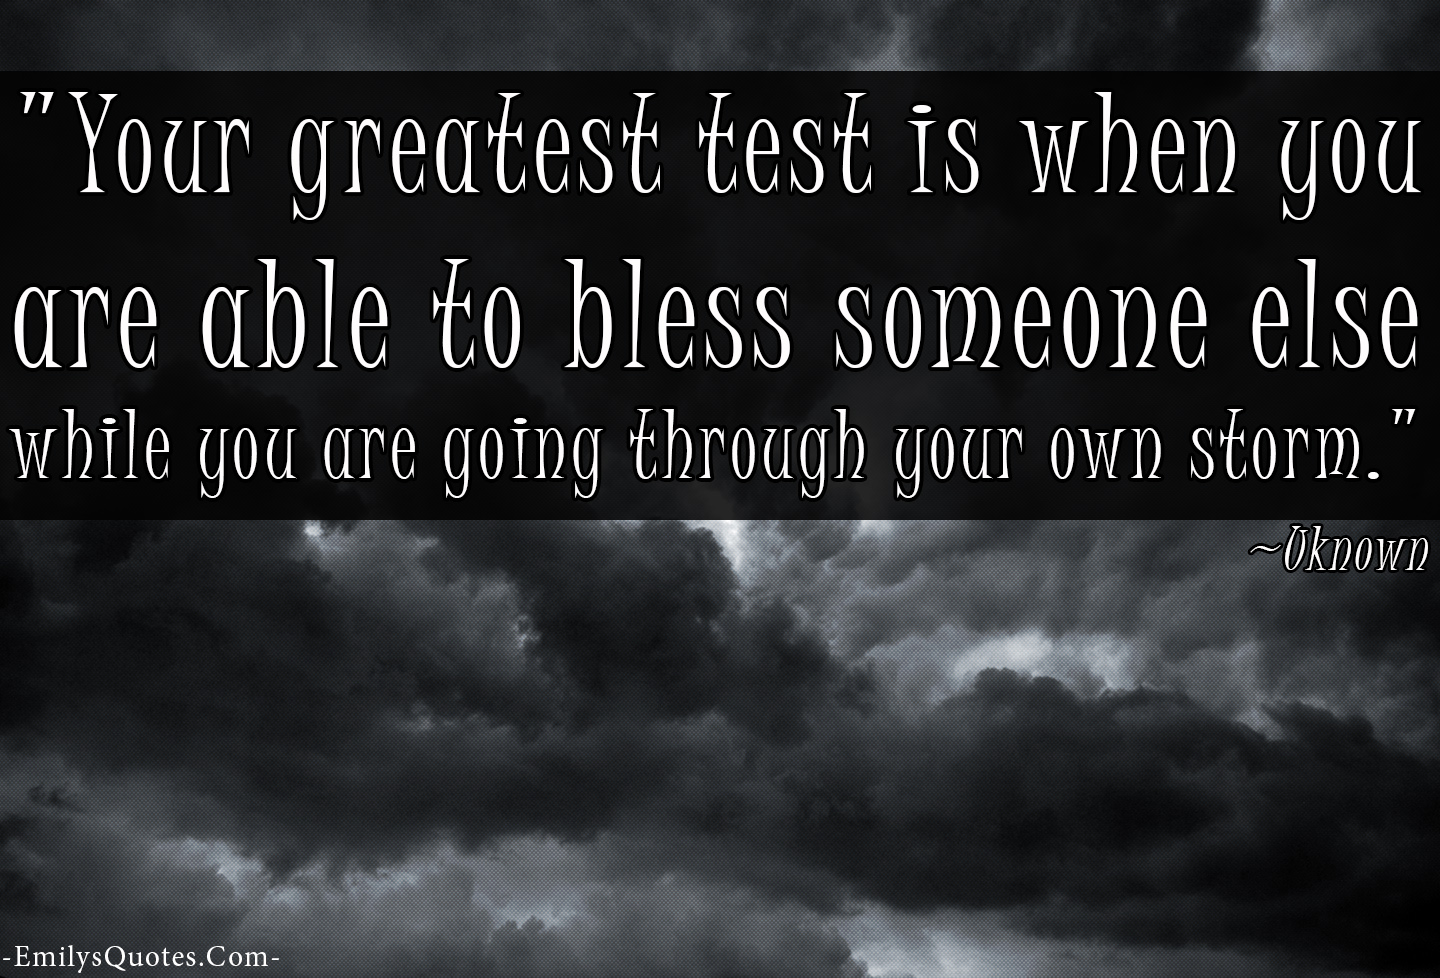 Your greatest test is when you are able to bless someone else while you are going through your own storm